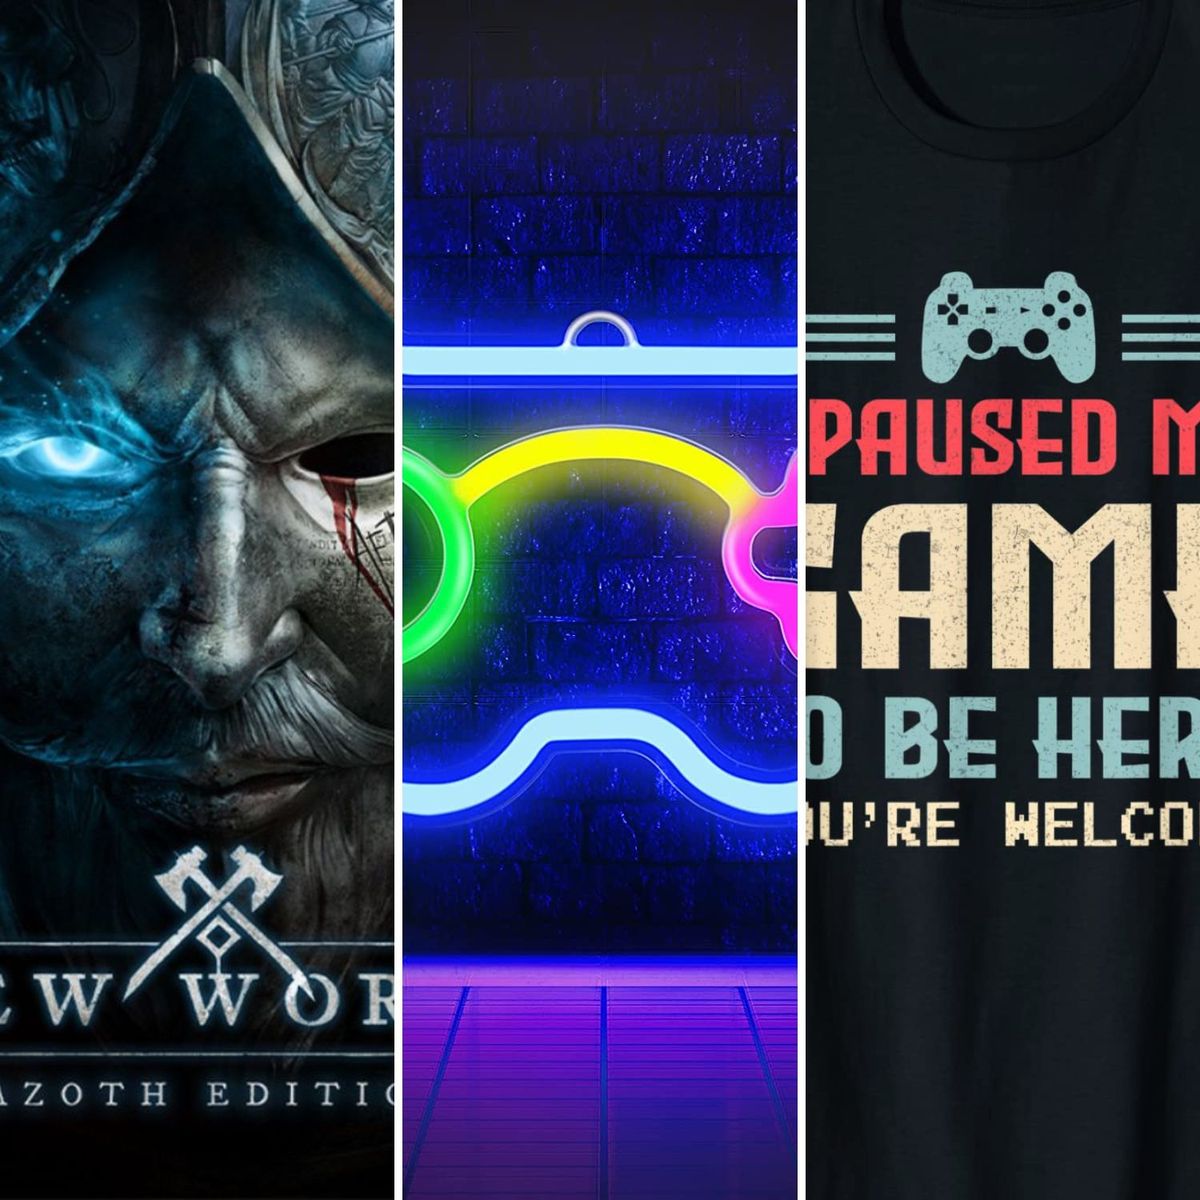 Gifts For Gamers